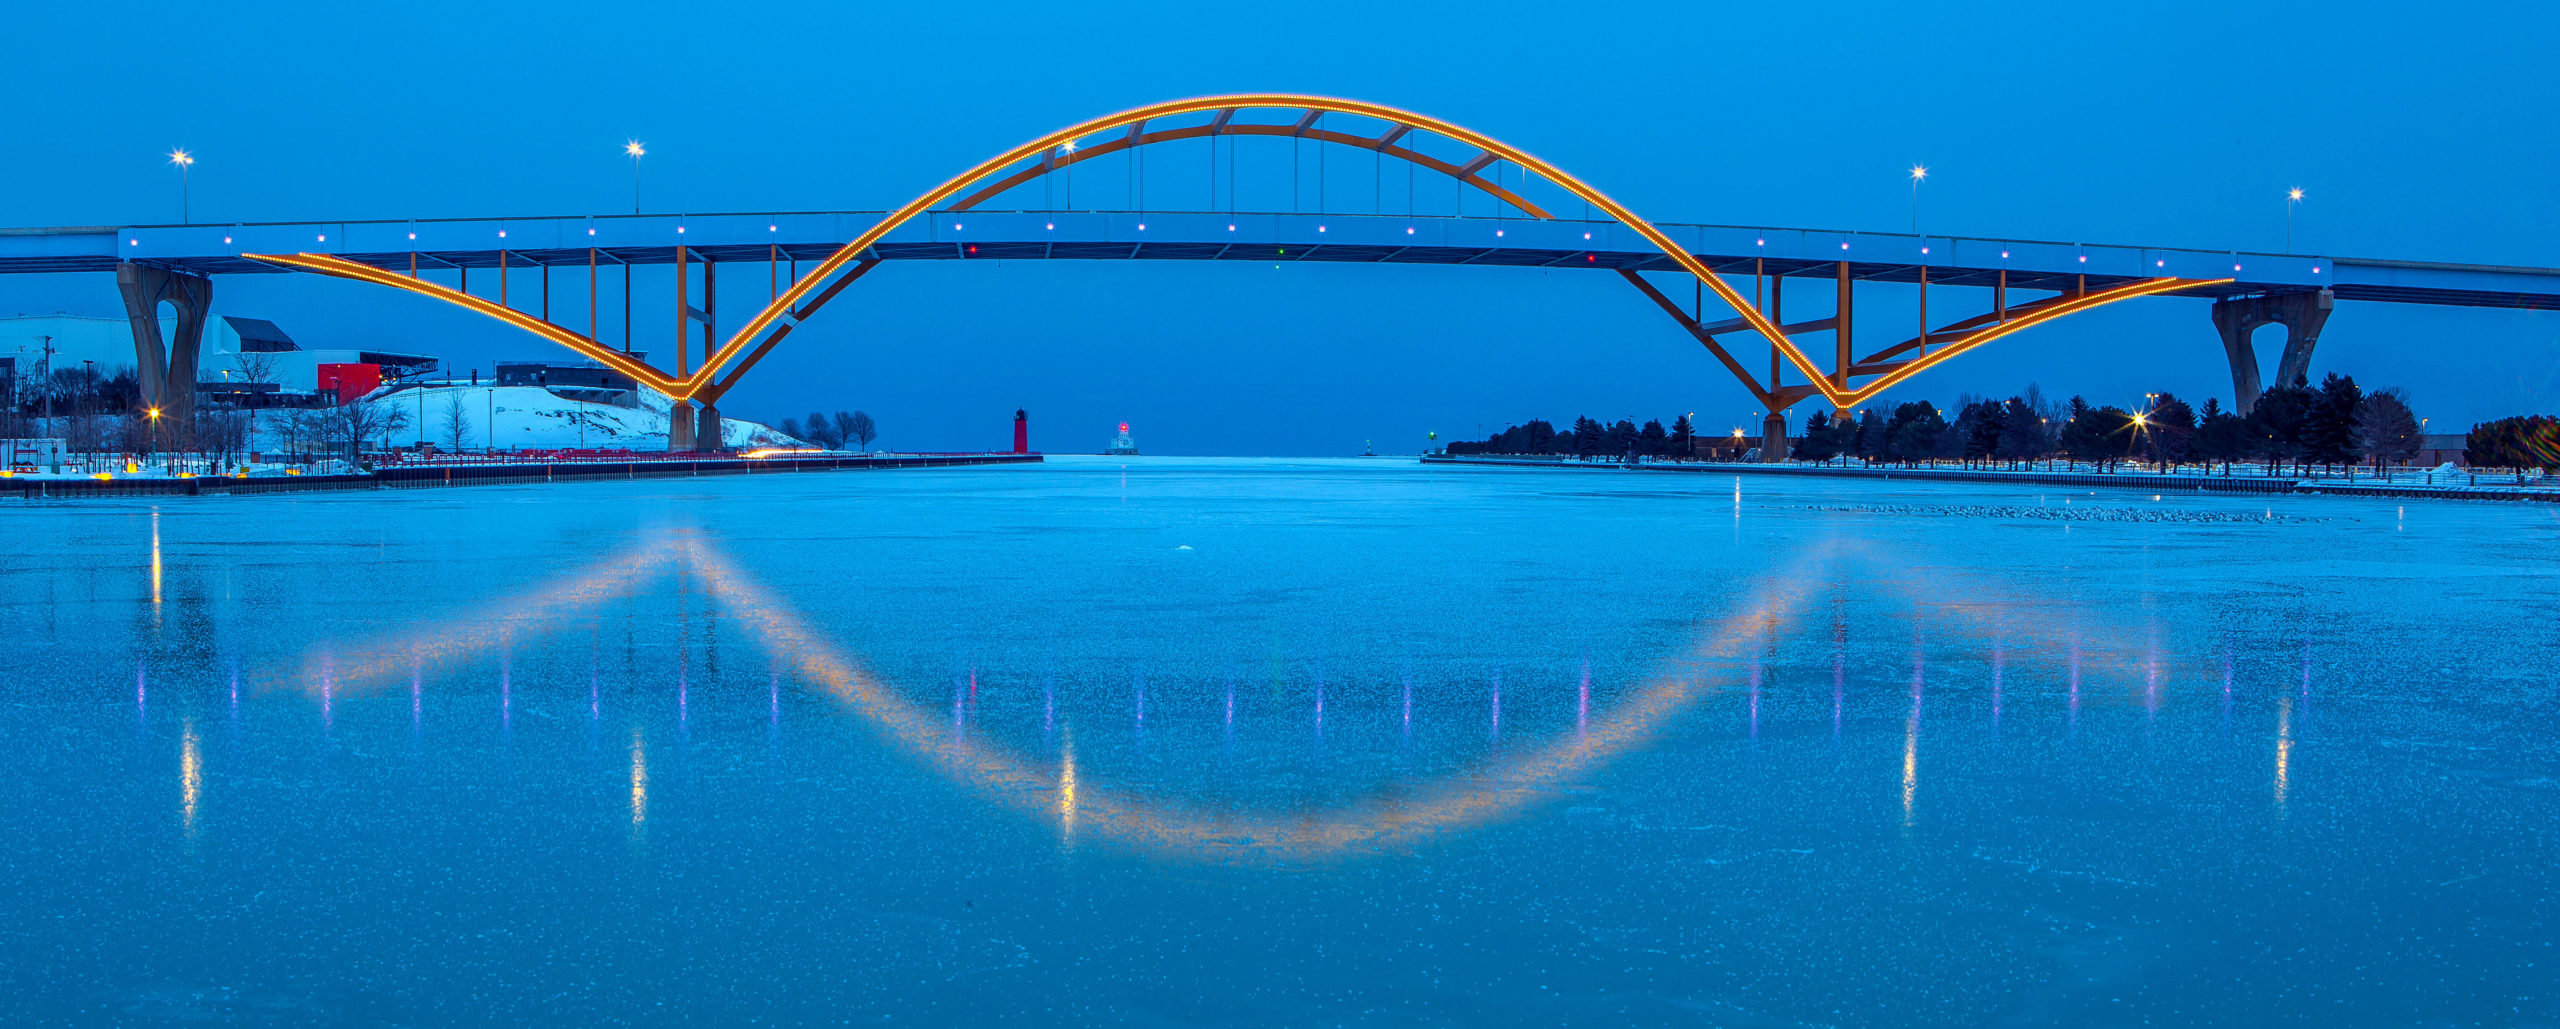 Bridge with large yellow arch over icy lake at dusk